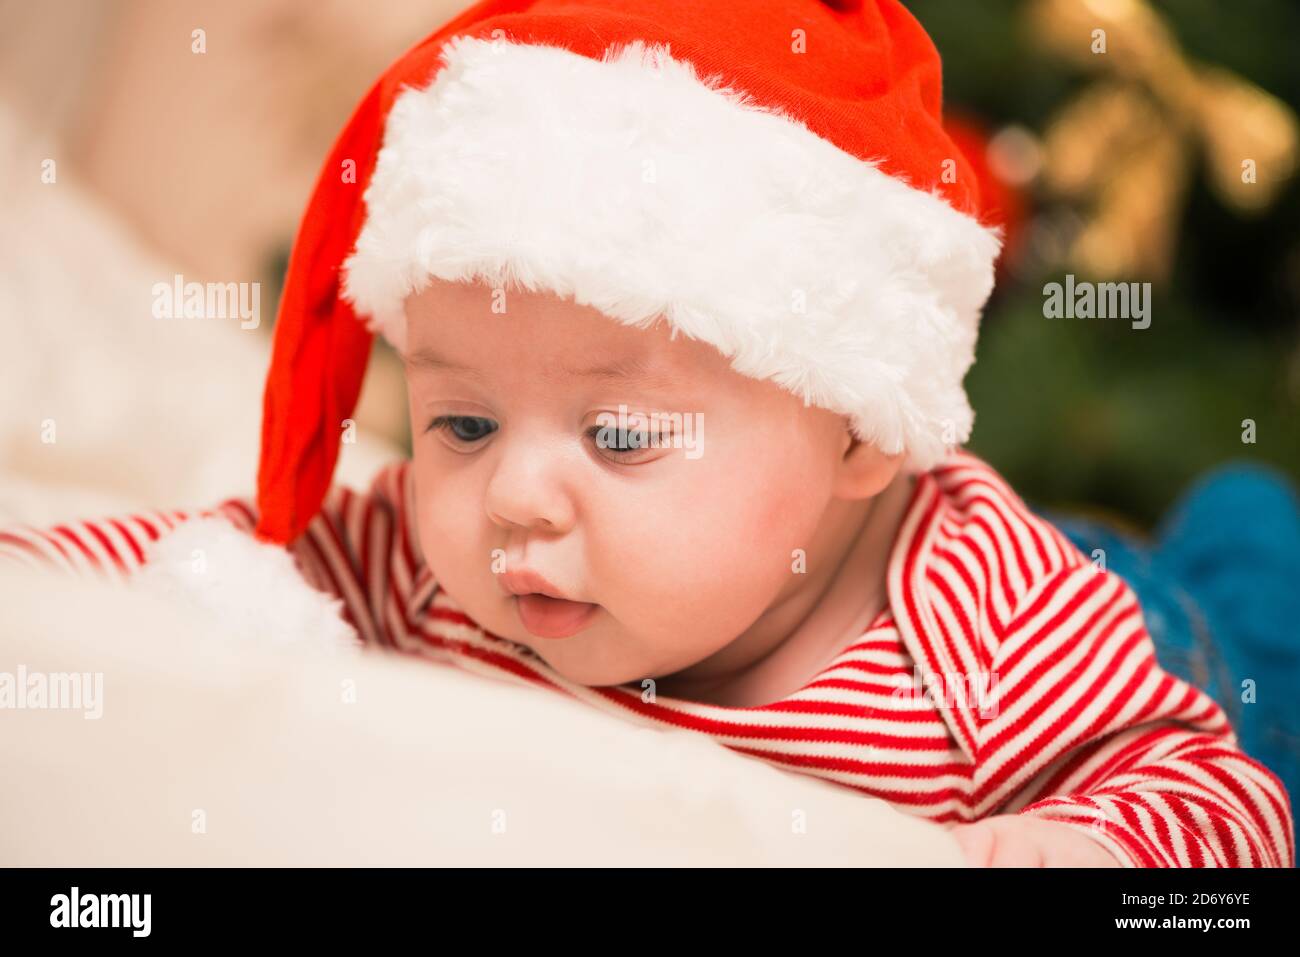 little baby portrait at holiday background Stock Photo